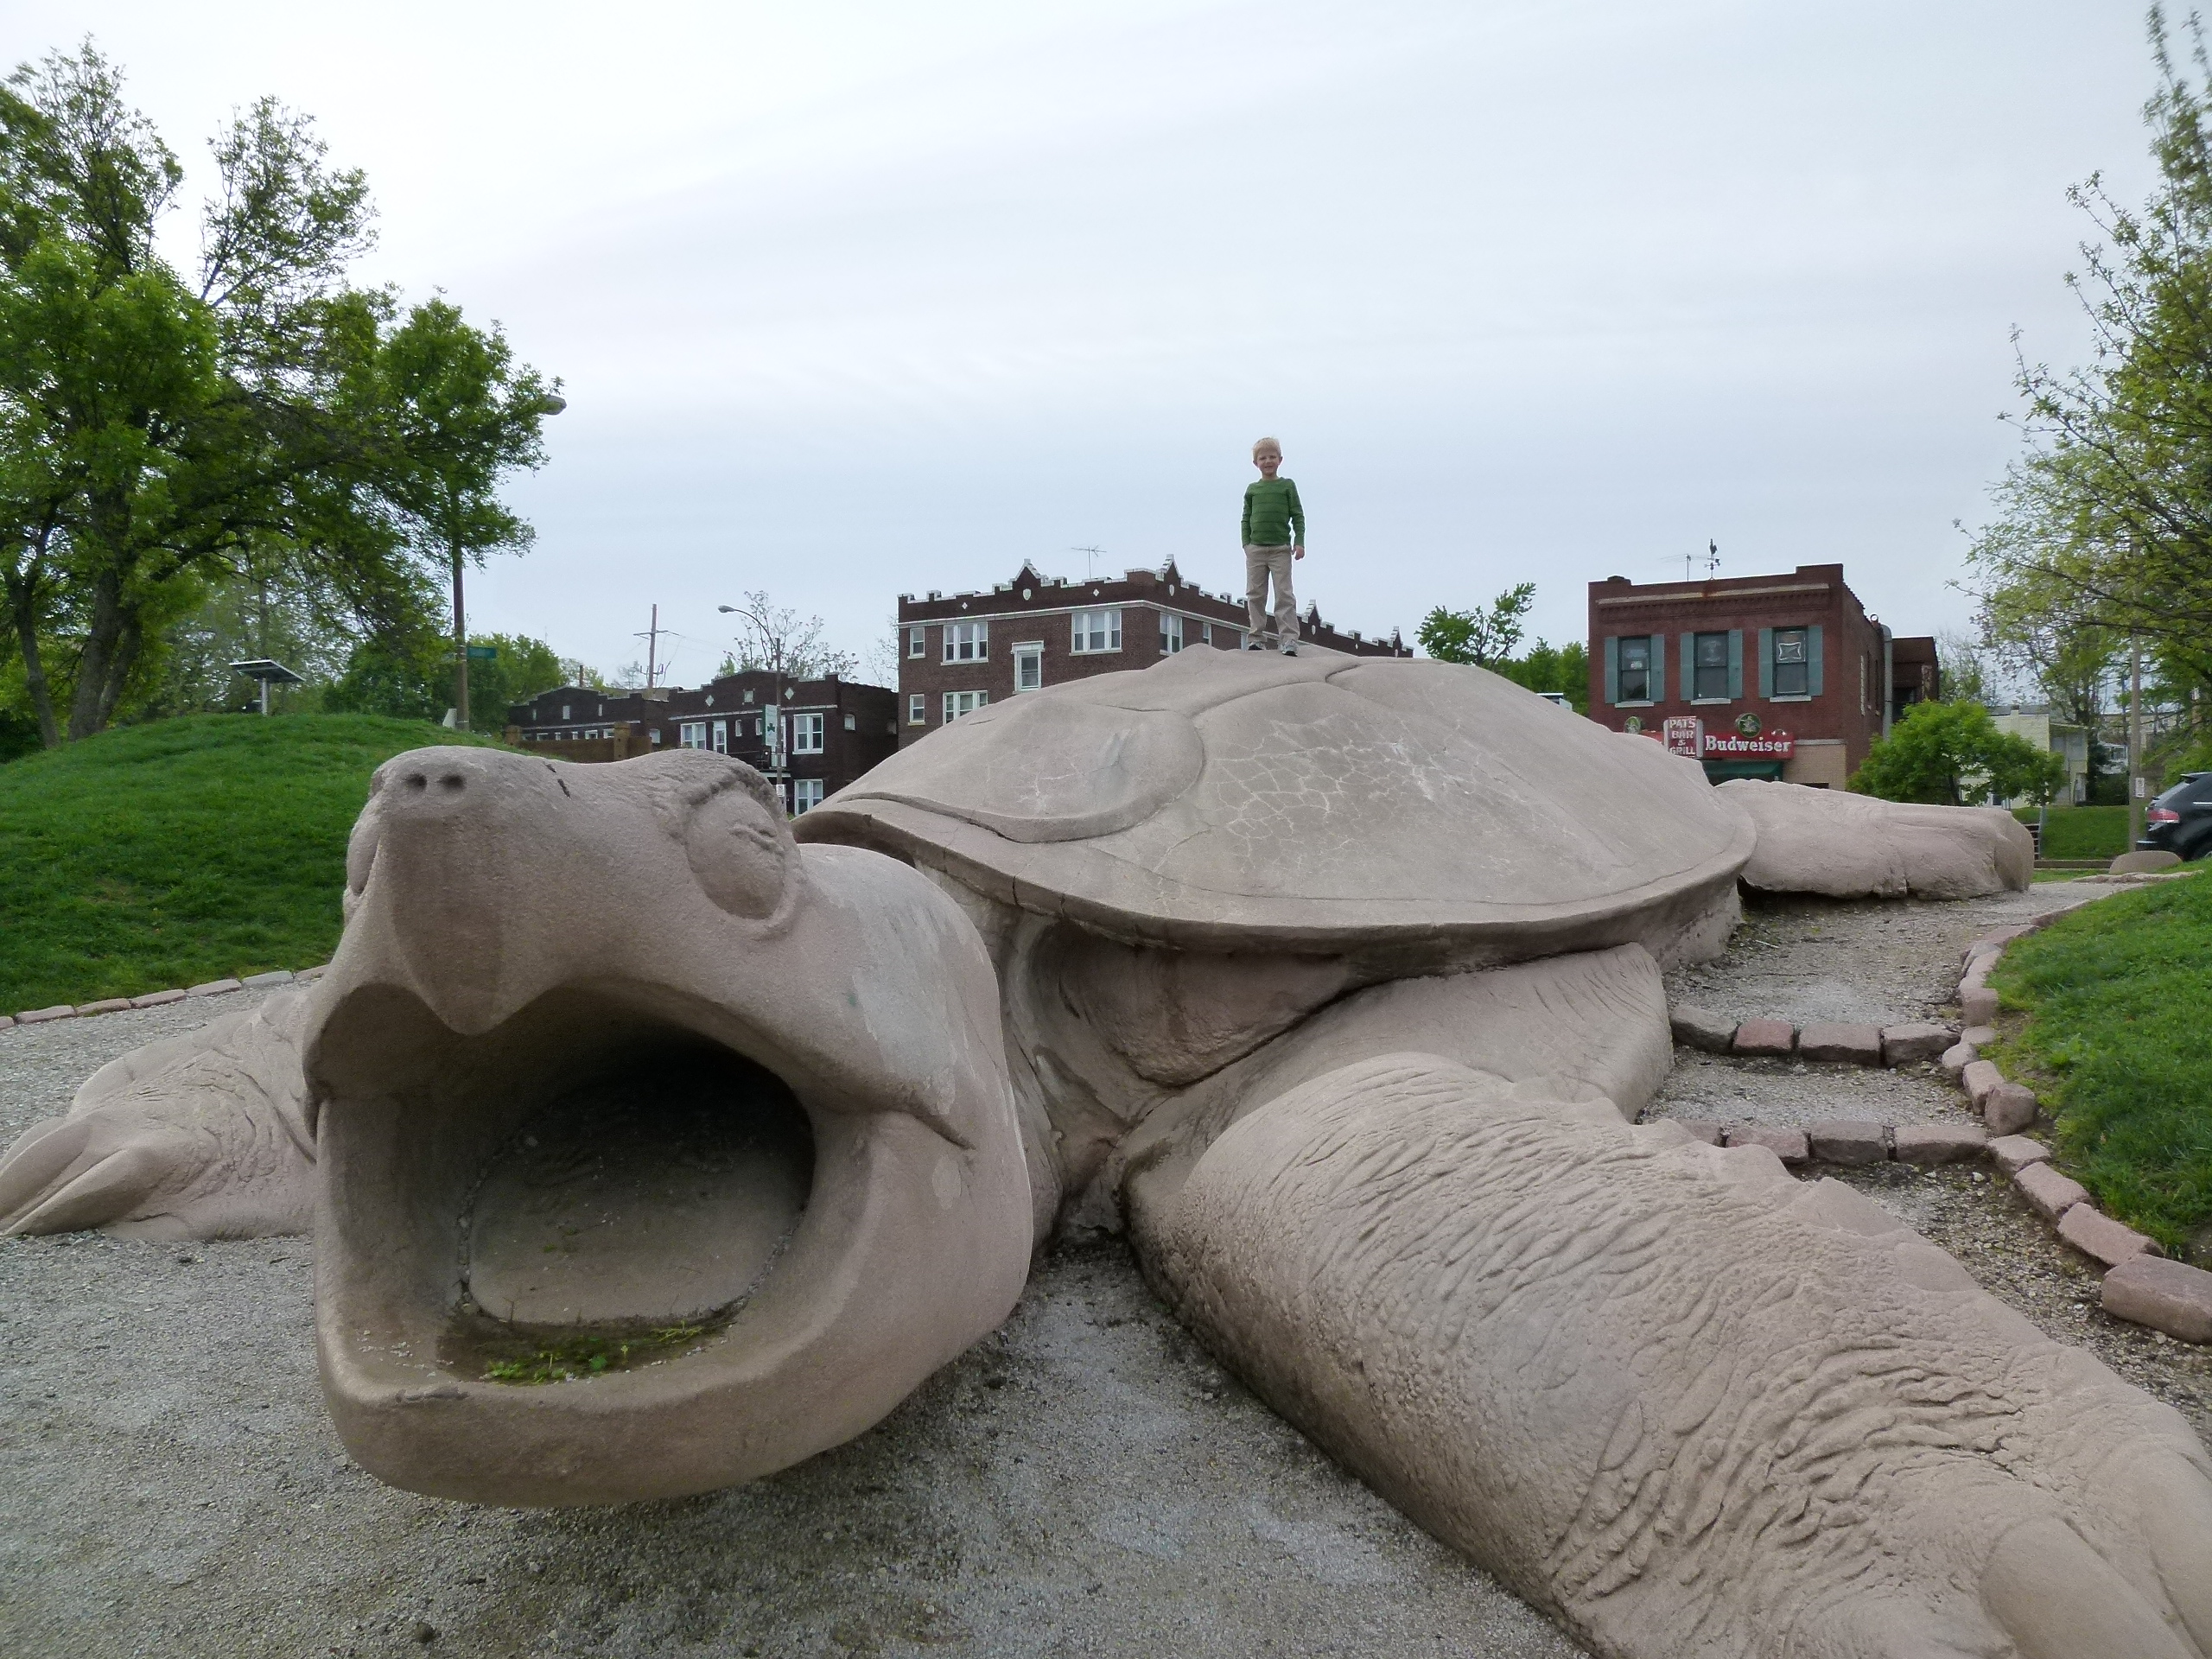 Turtle Playground in Forest Park - St. Louis, MO Image